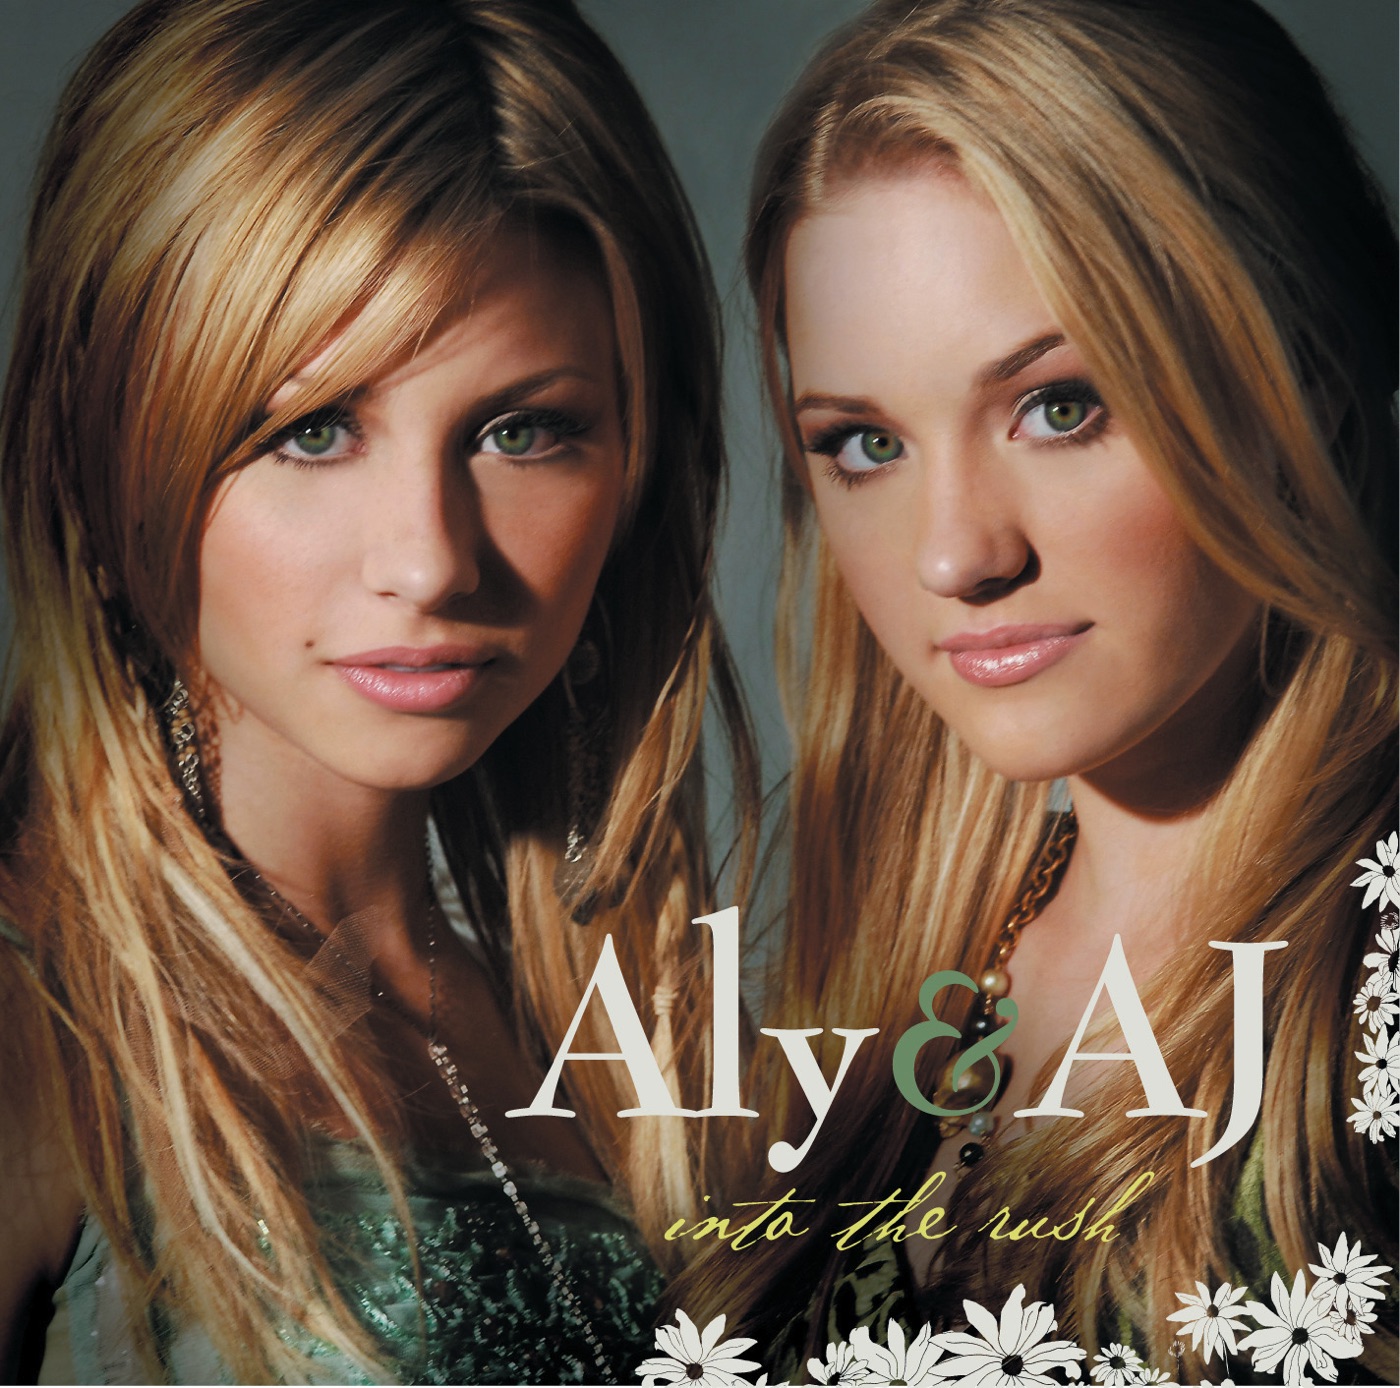 Into The Rush by Aly & AJ